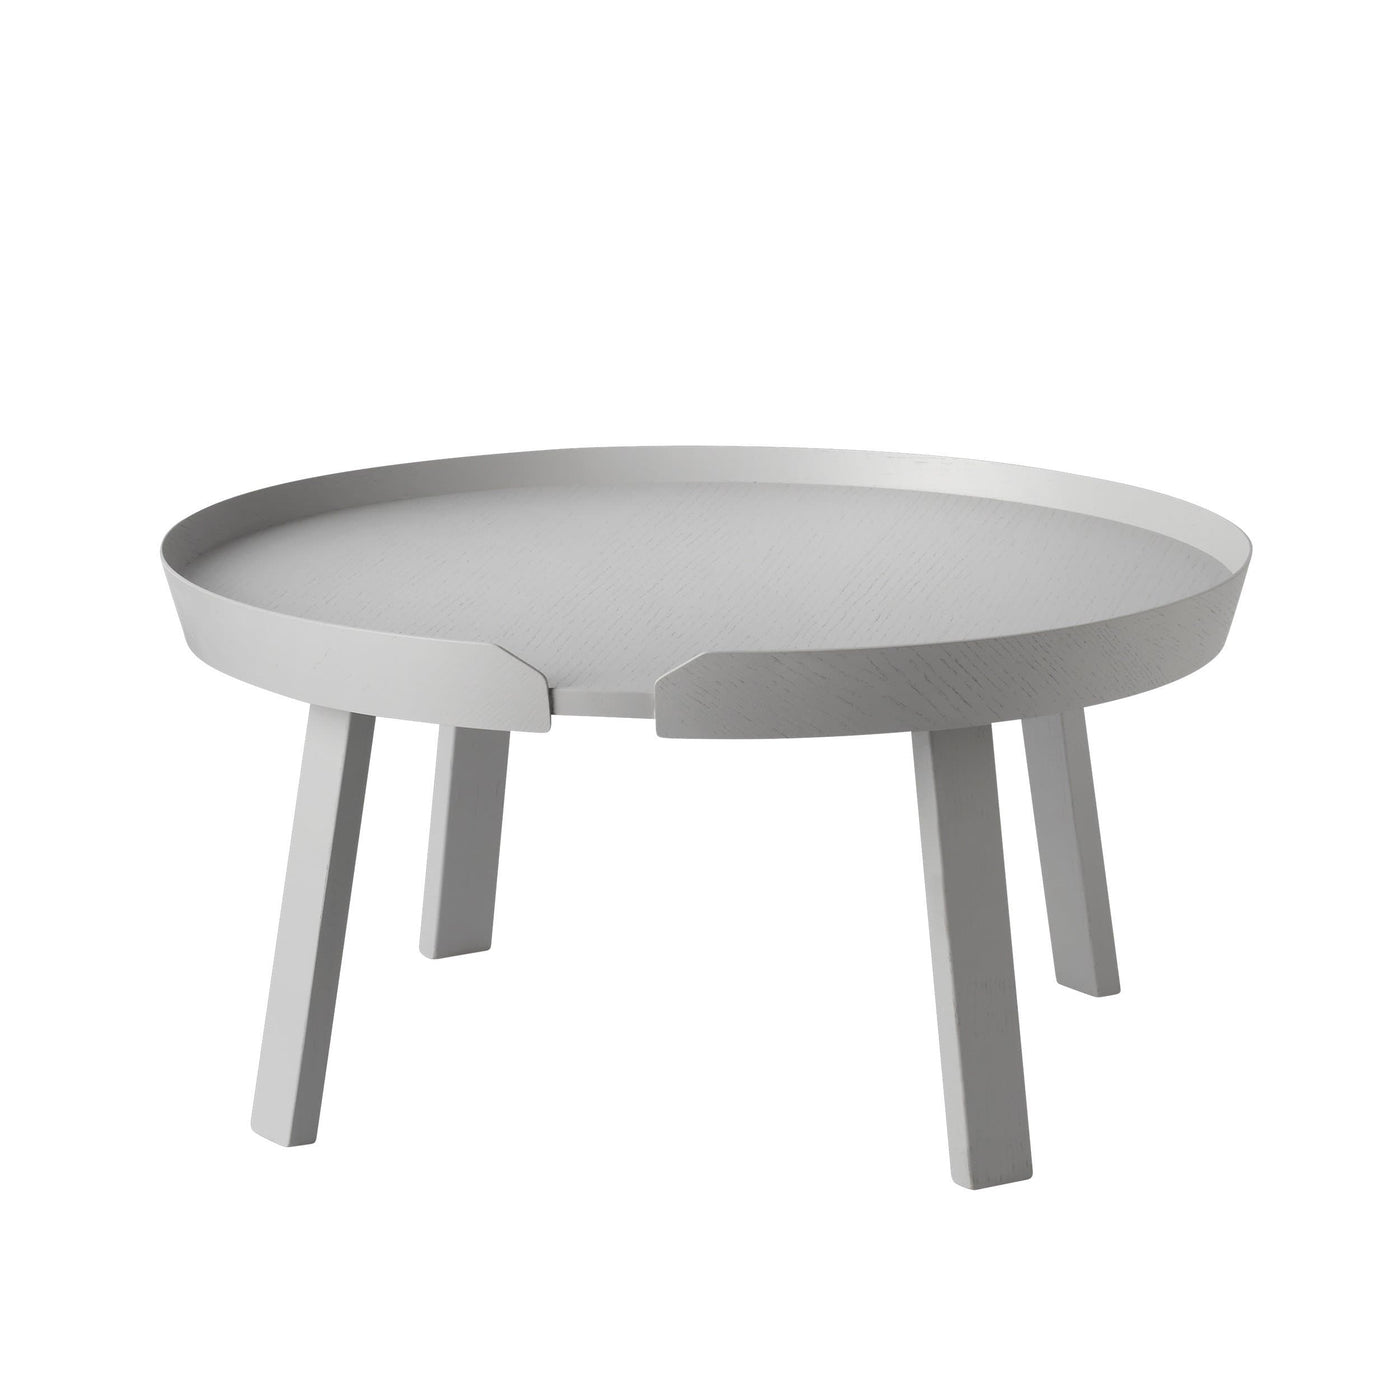 Muuto Around Coffee Table large. Available from someday designs . #colour_grey